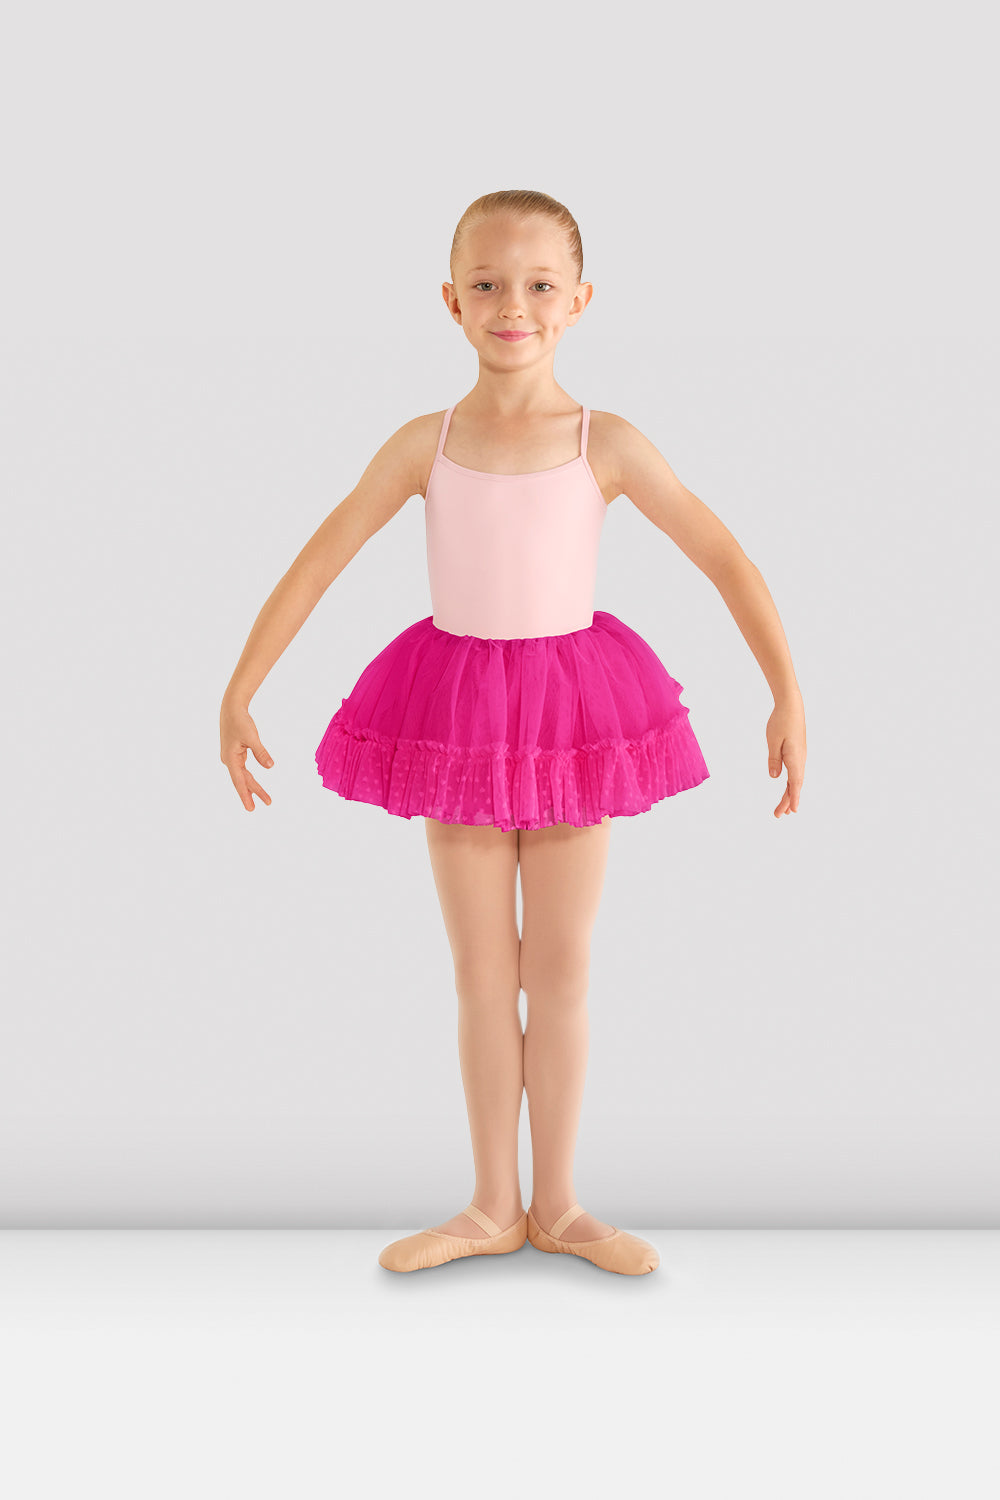 A young female ballet dancer wearing a candy pink camisole leotard with Girls Addelyn heart mesh tutu